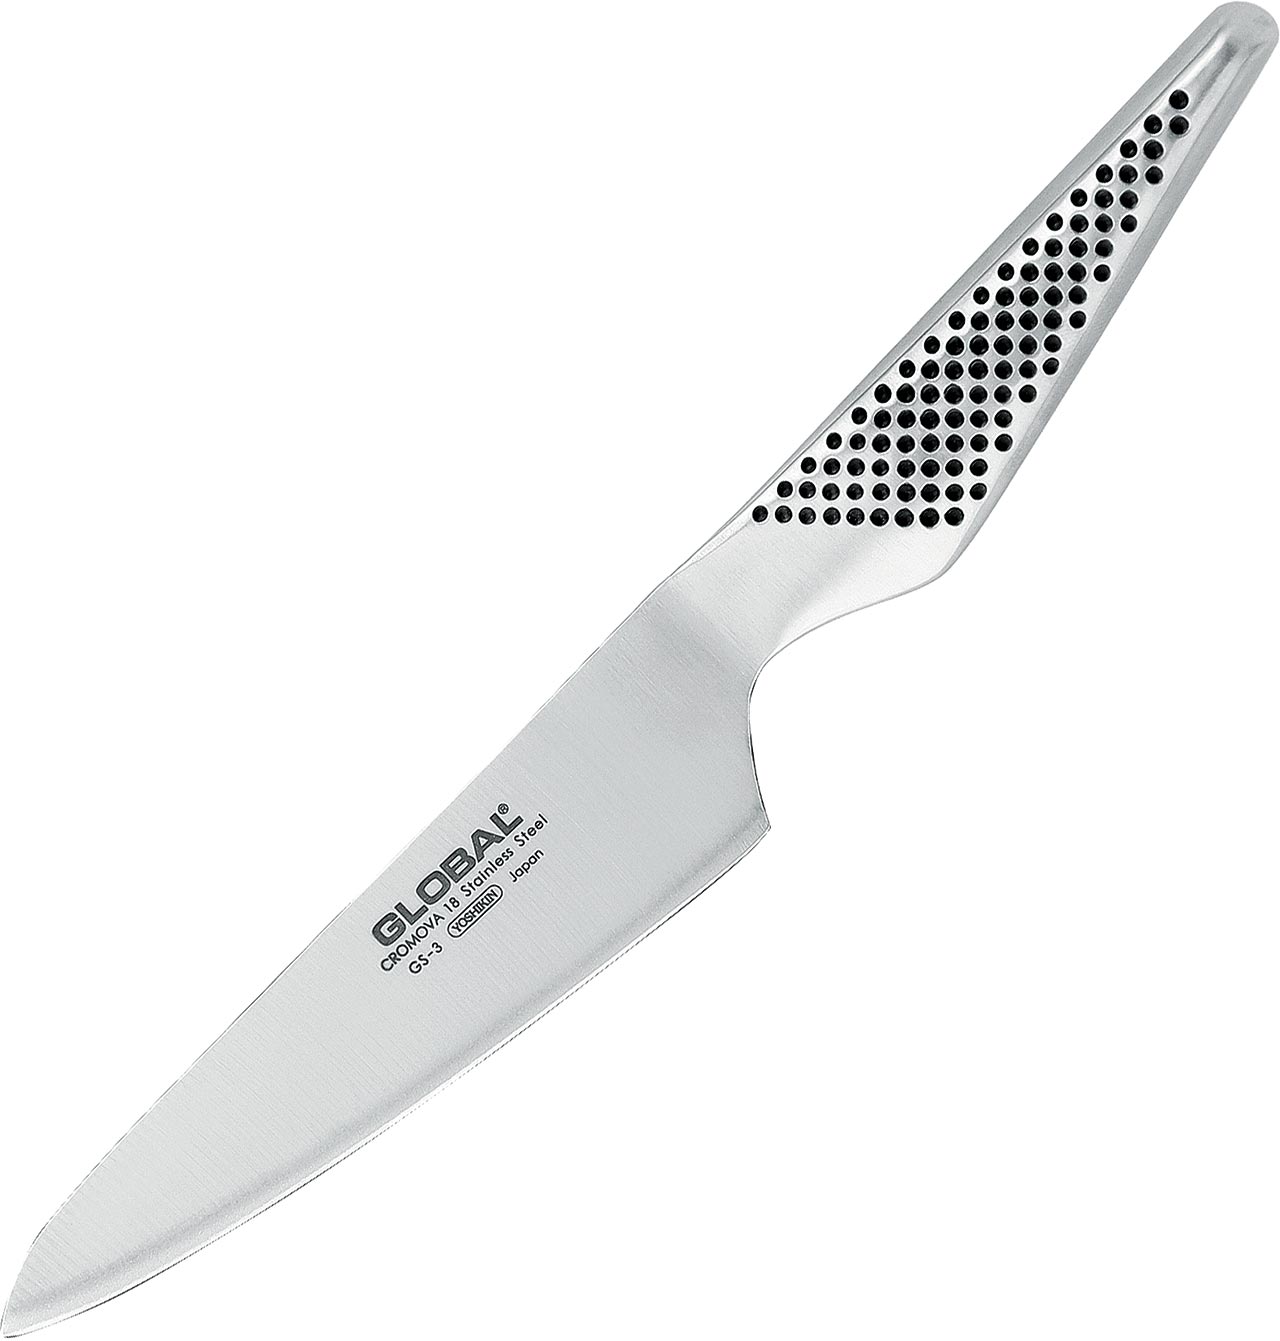 GS-3 Cook's Knife 13cm